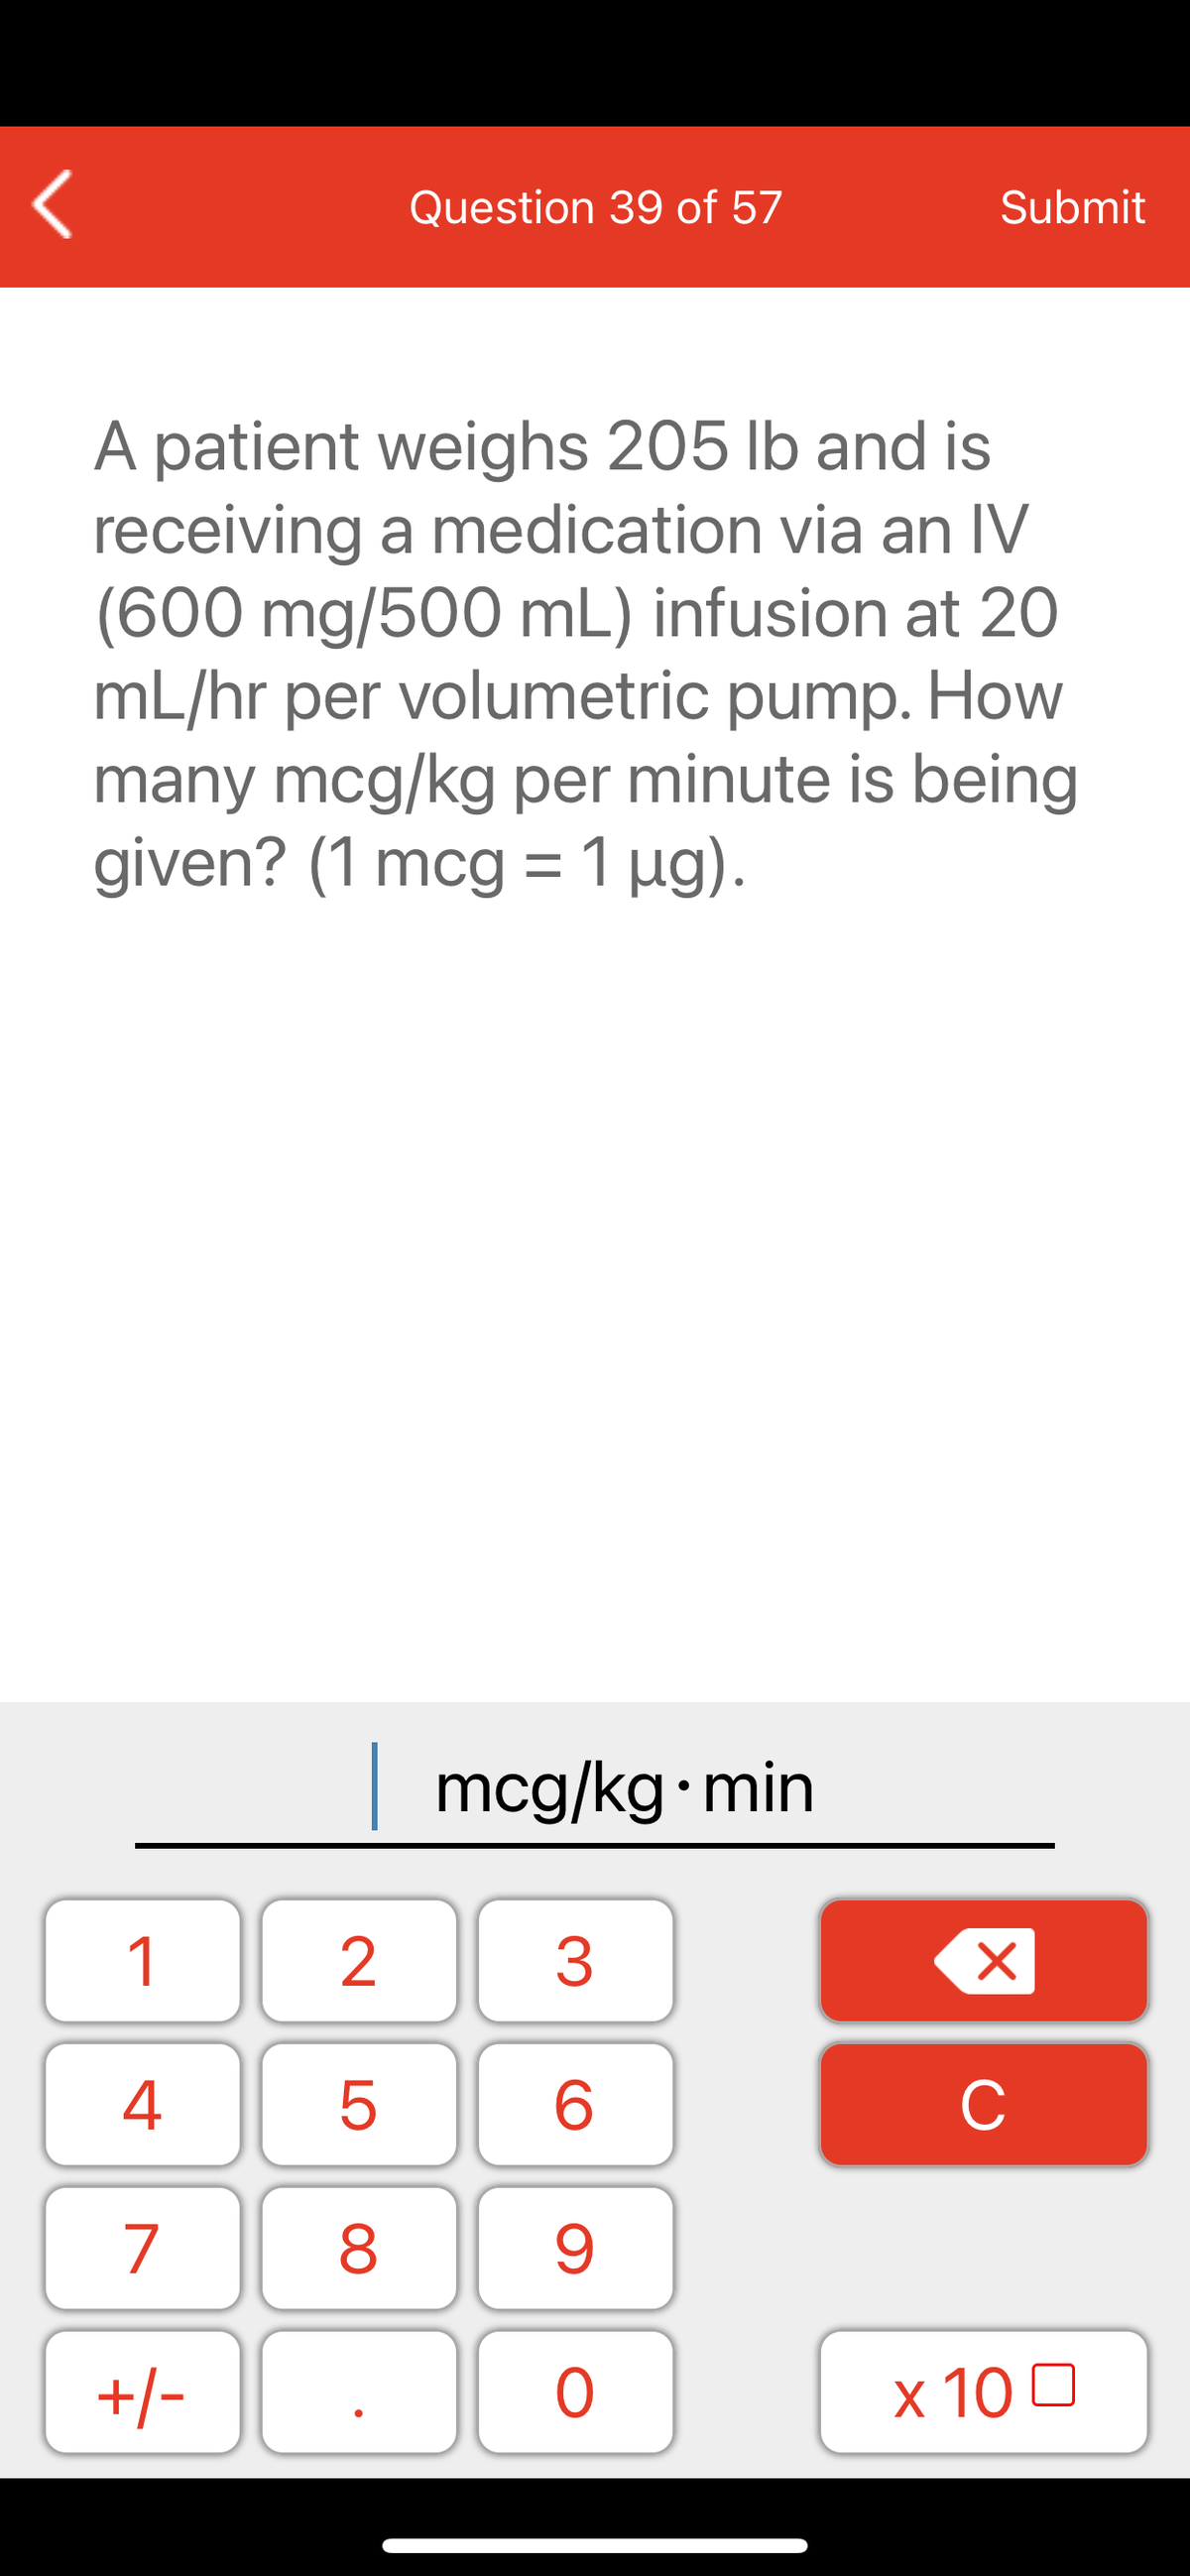 Question 39 of 57
Submit
A patient weighs 205 lb and is
receiving a medication via an IV
(600 mg/500 mL) infusion at 20
mL/hr per volumetric pump. How
many mcg/kg per minute is being
given? (1 mcg =1 µg).
| mcg/kg min
1
C
7
9.
+/-
x 10 0
LO
00
